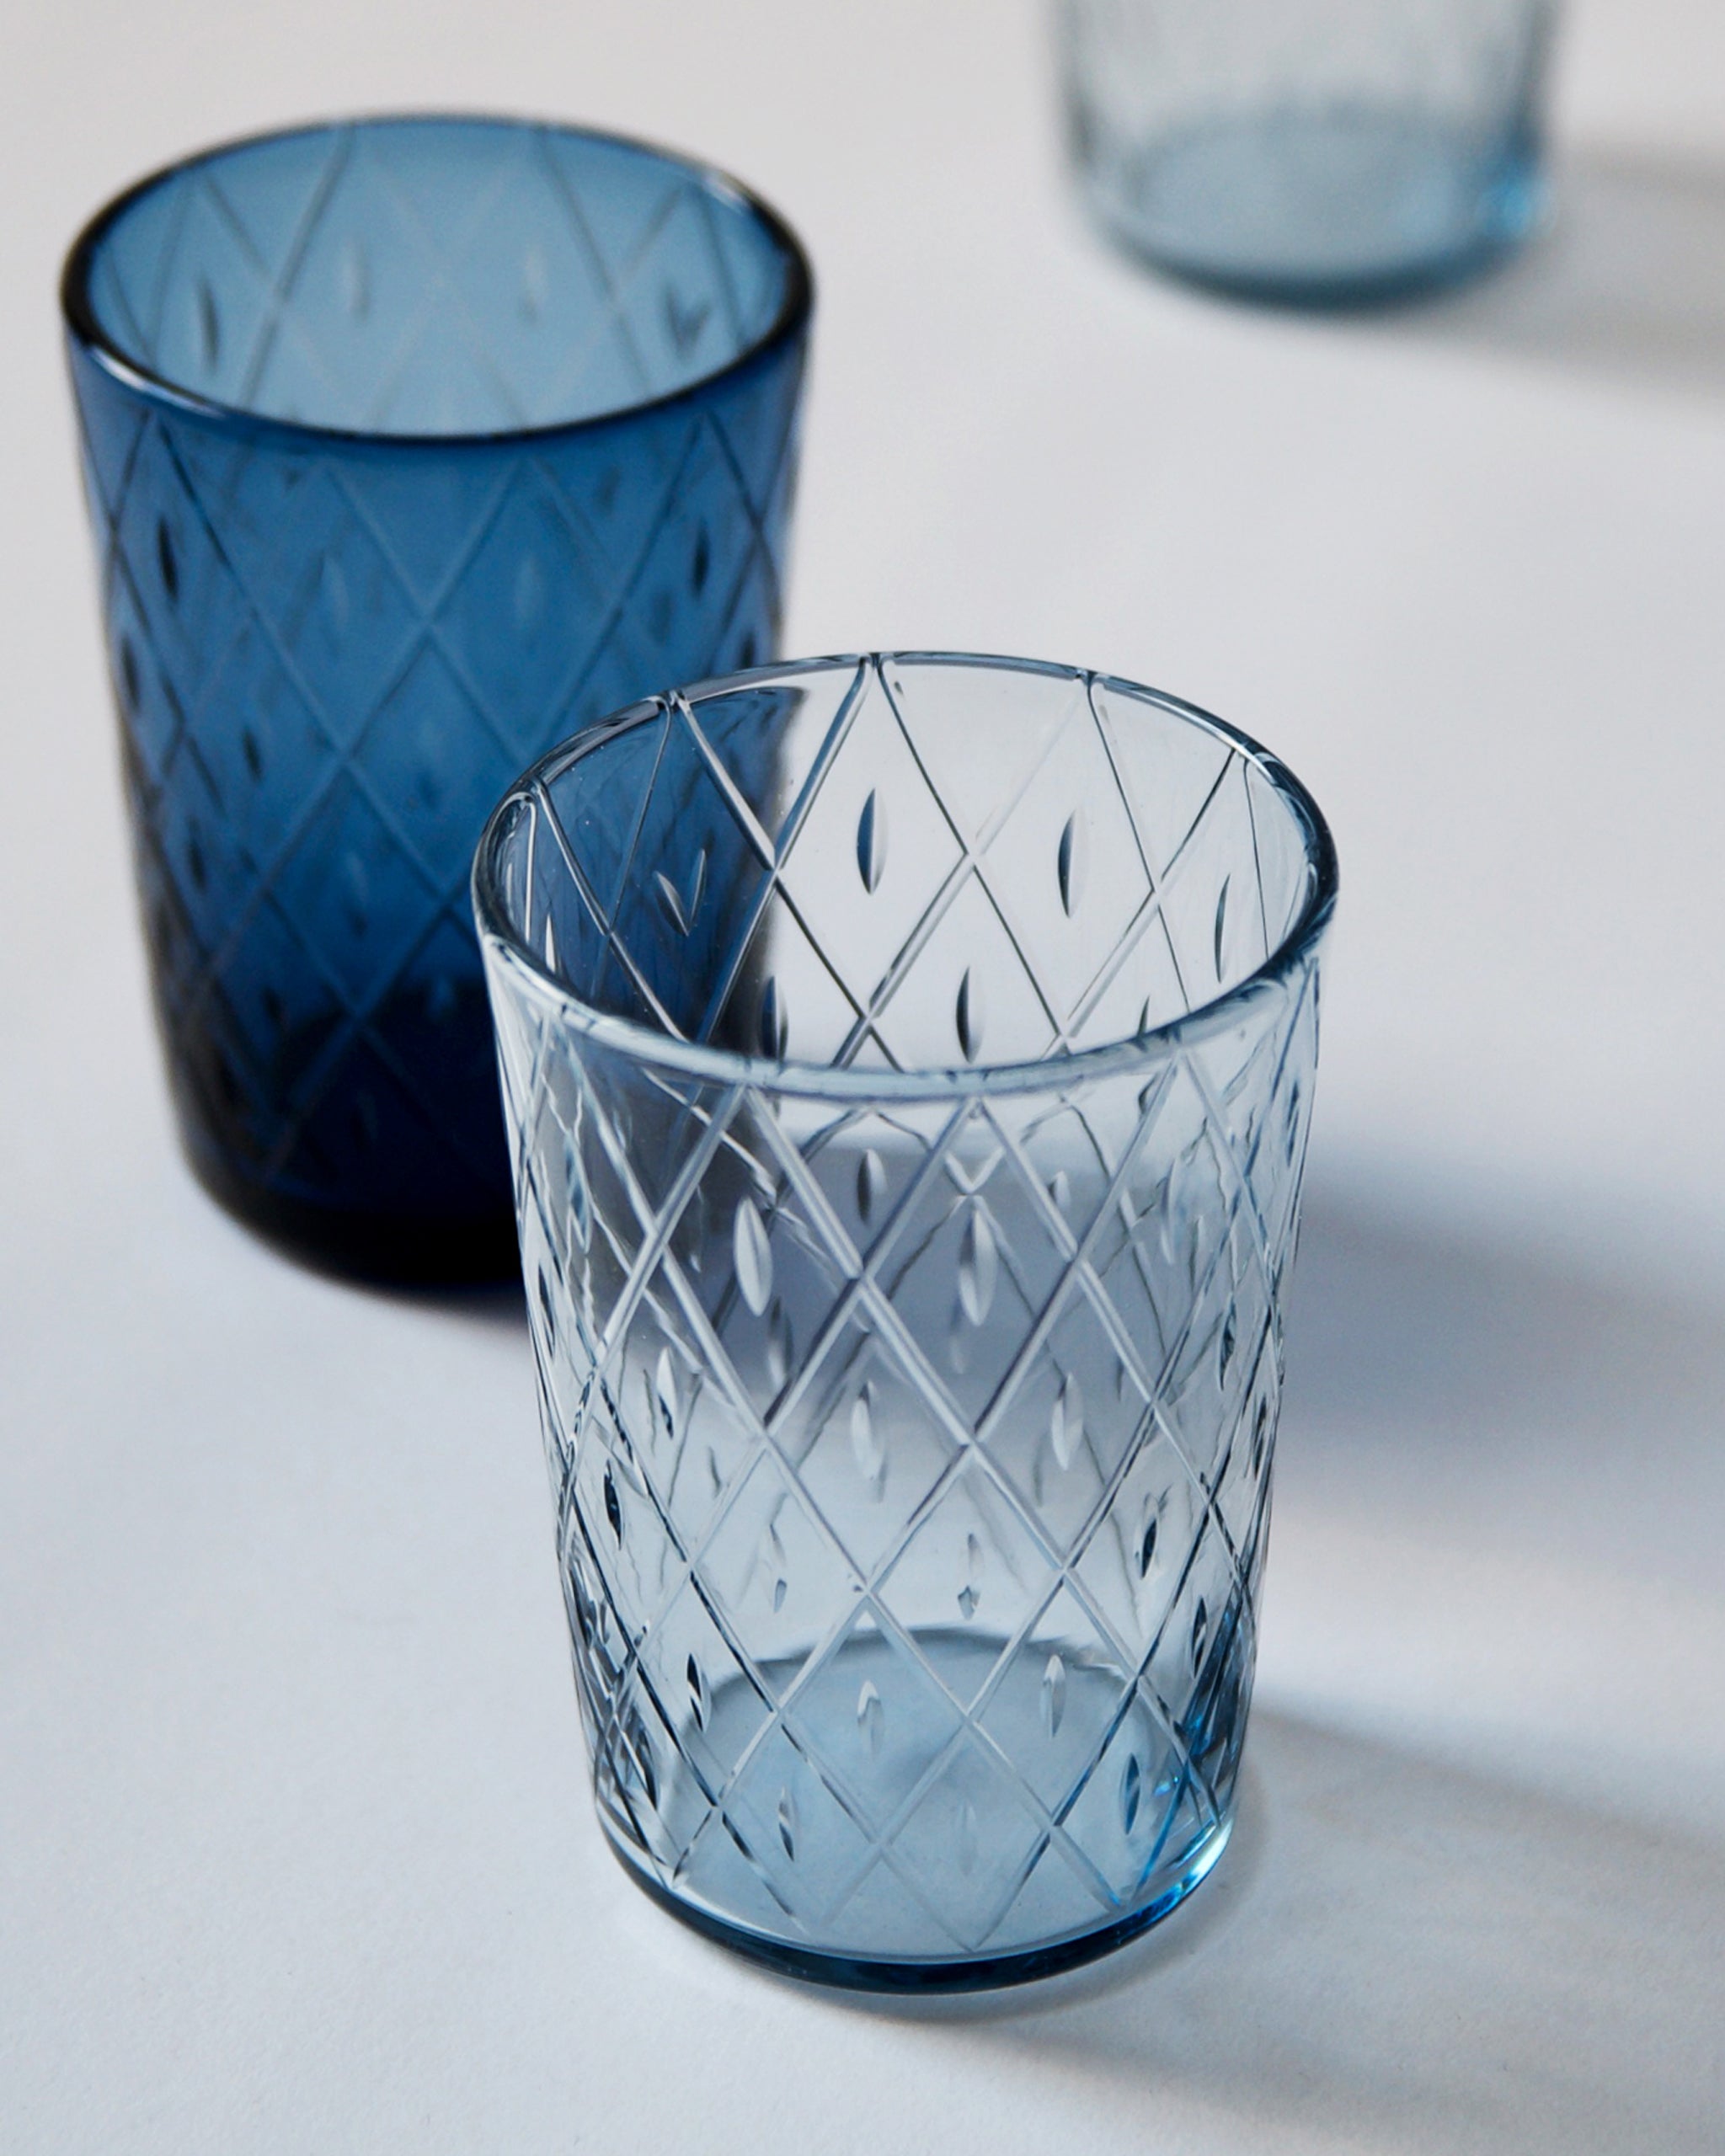 Reclaimed Blue Ordinary Cup - Wire Net